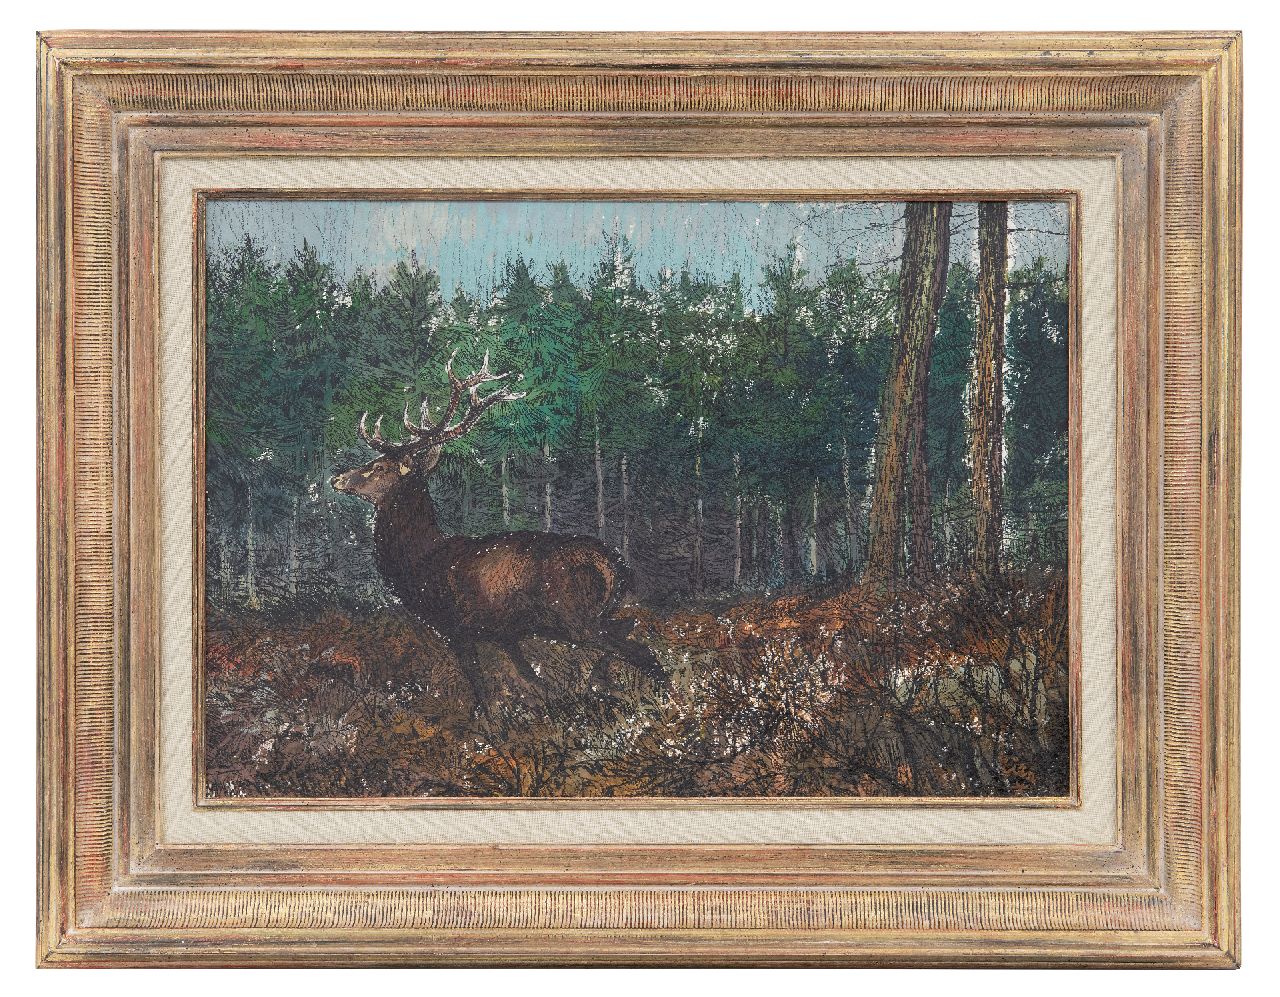 Poortvliet R.  | Rien Poortvliet, A deer in the forest, acrylic on paper 29.4 x 41.9 cm, signed l.r.